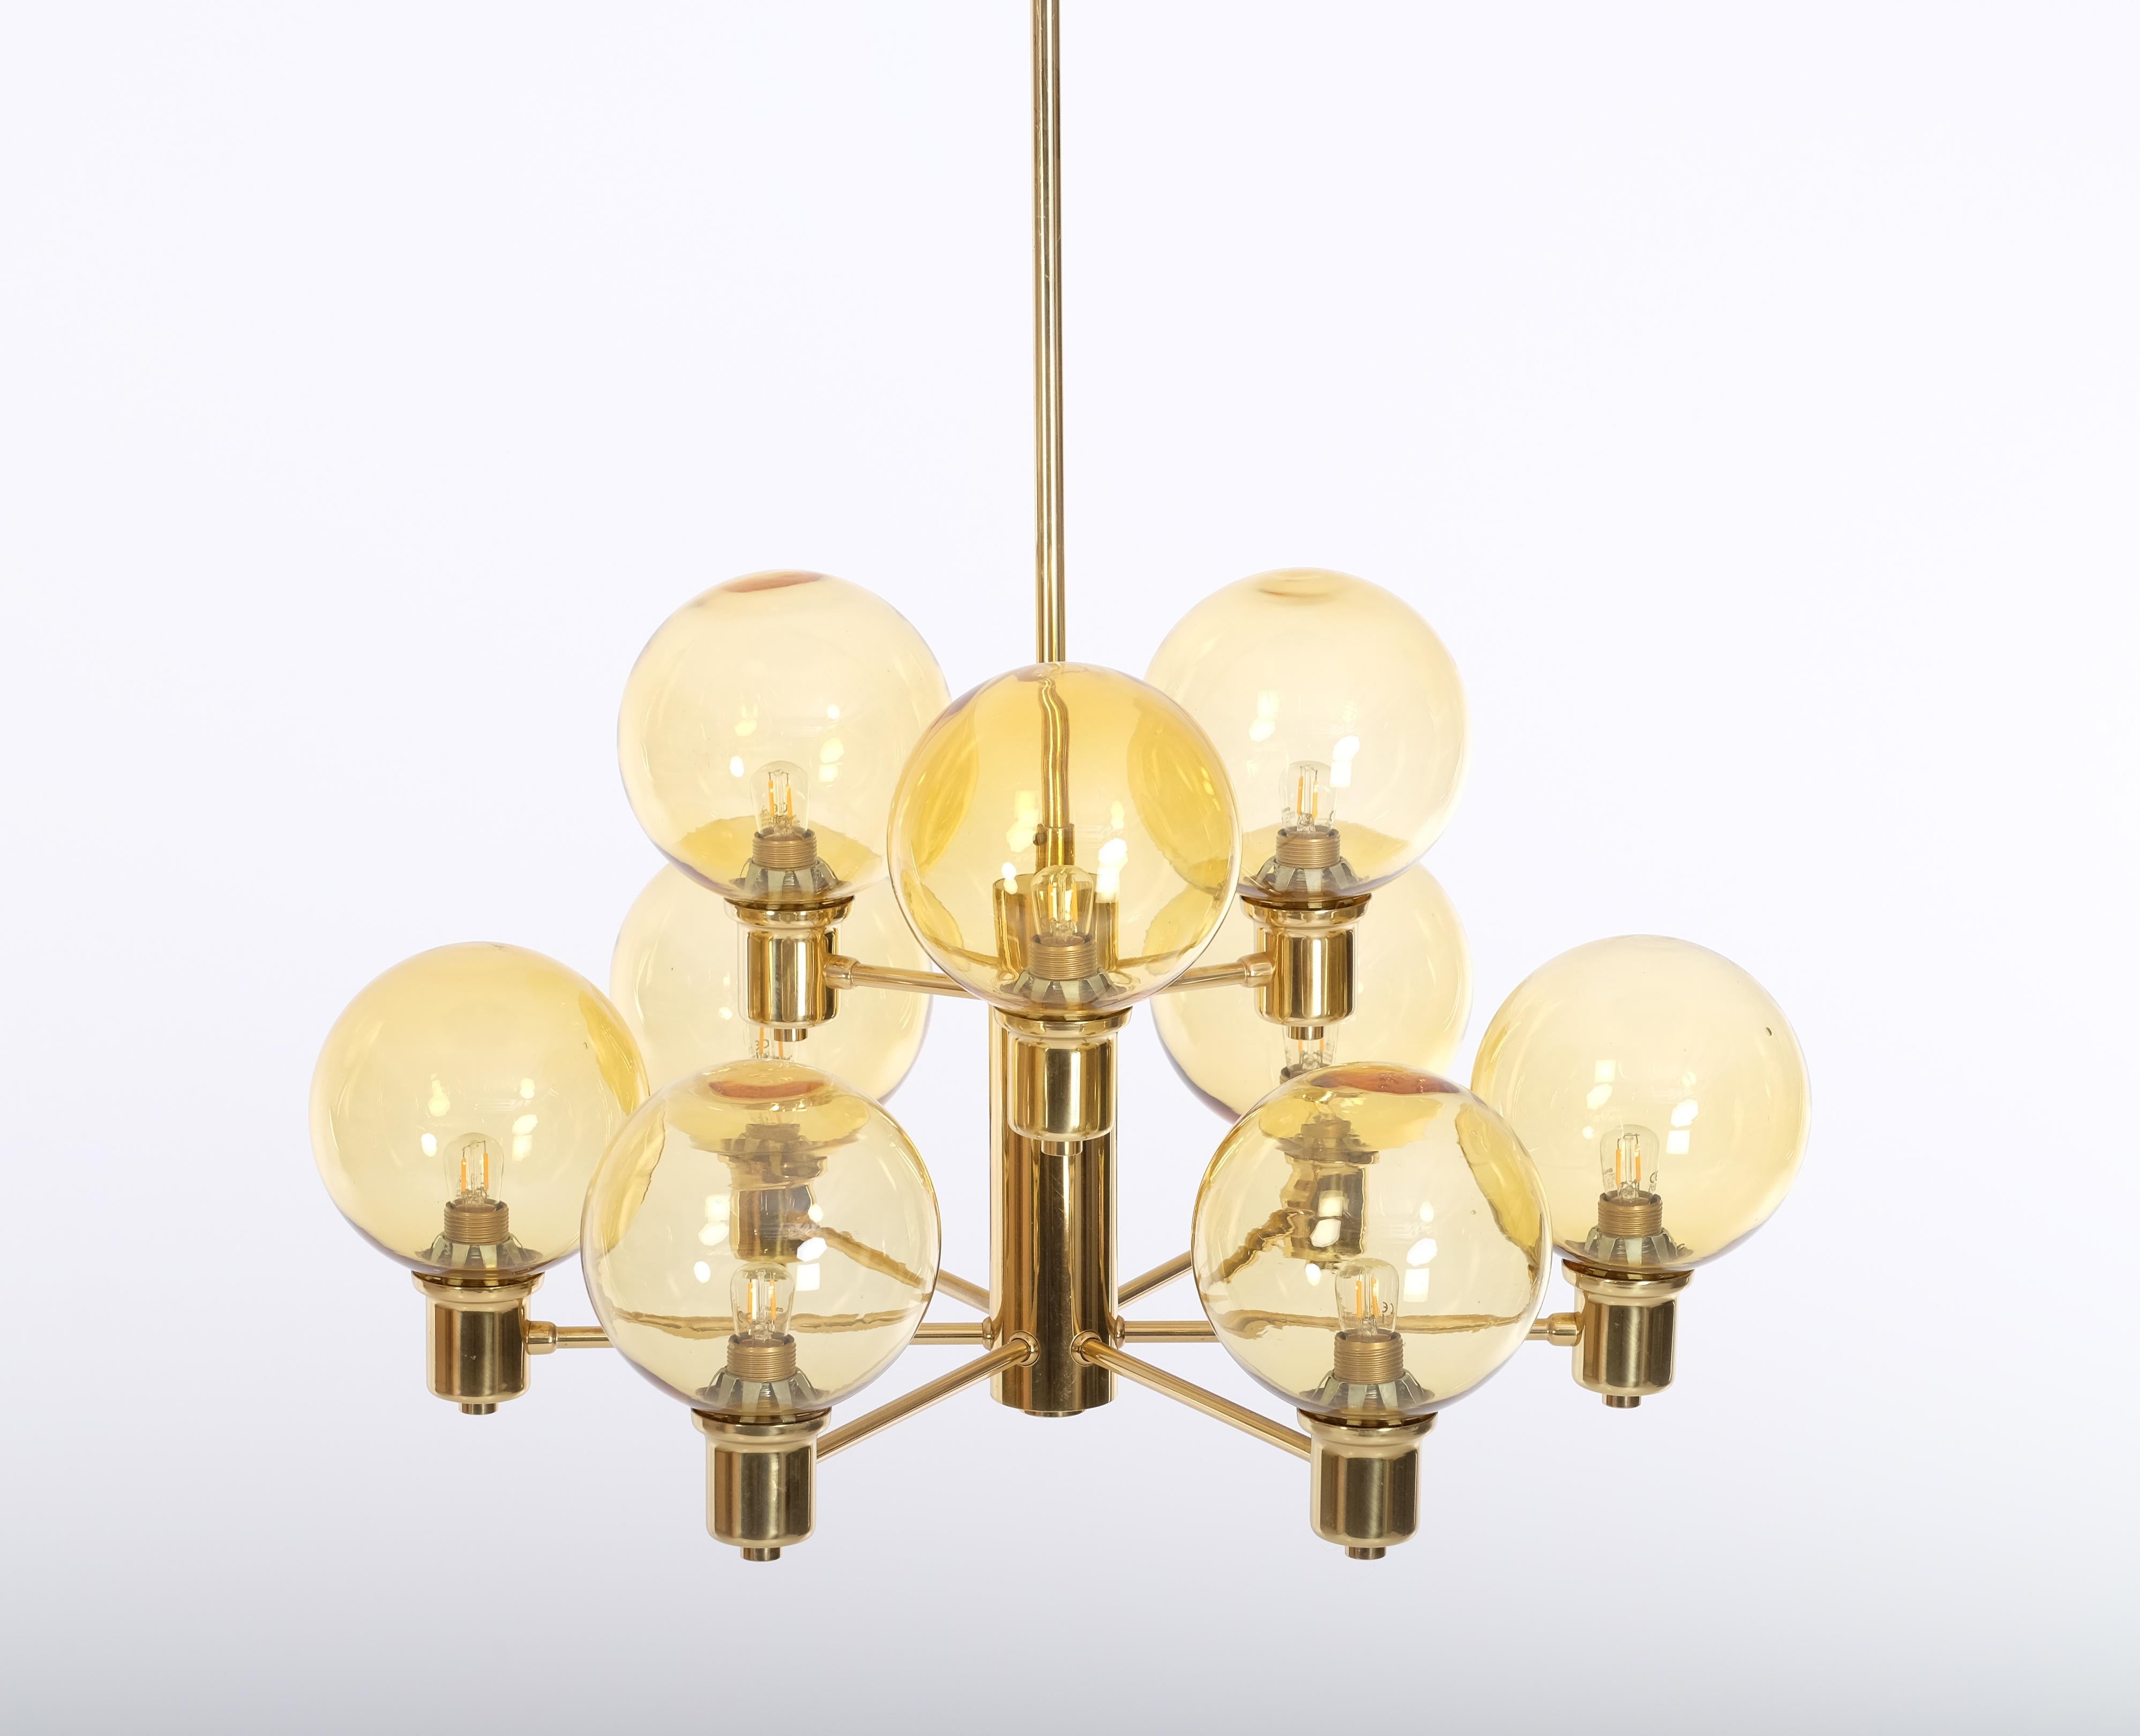 Swedish Set of 4 brass & glass chandeliers, Sweden, 1960s For Sale